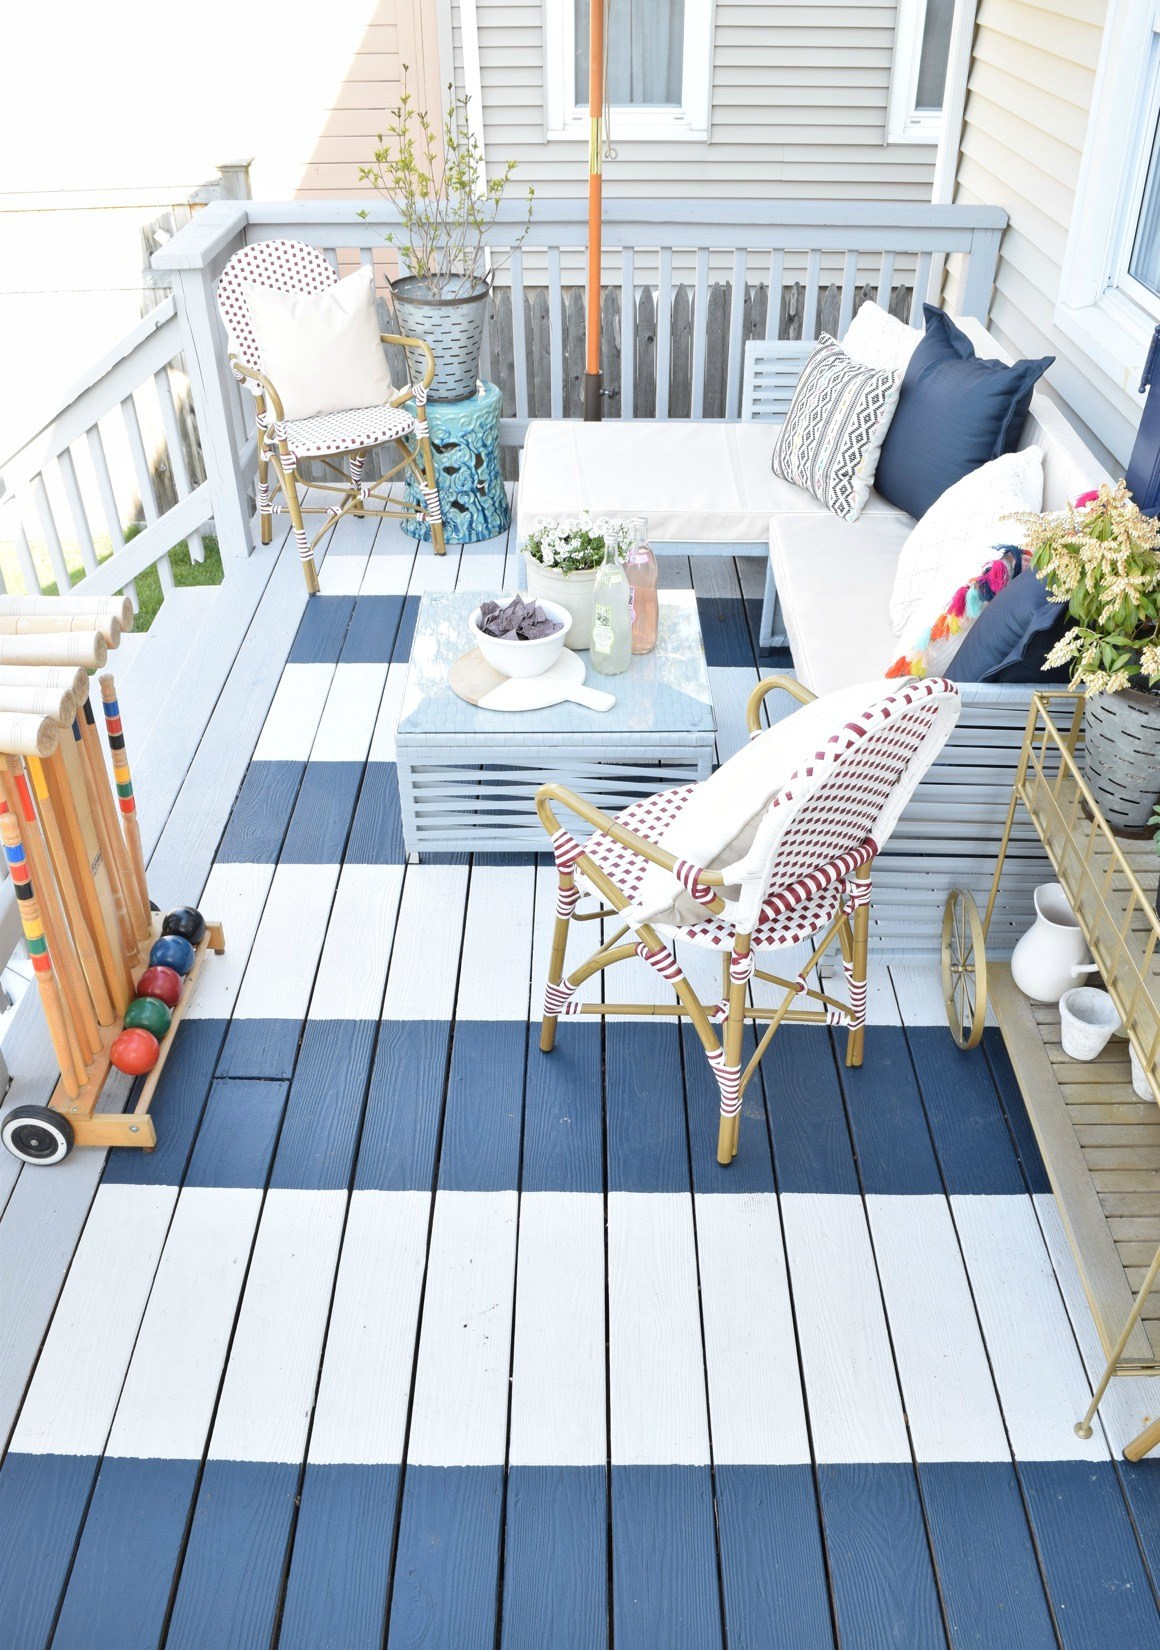 A wooden deck painted blue and white stripes.